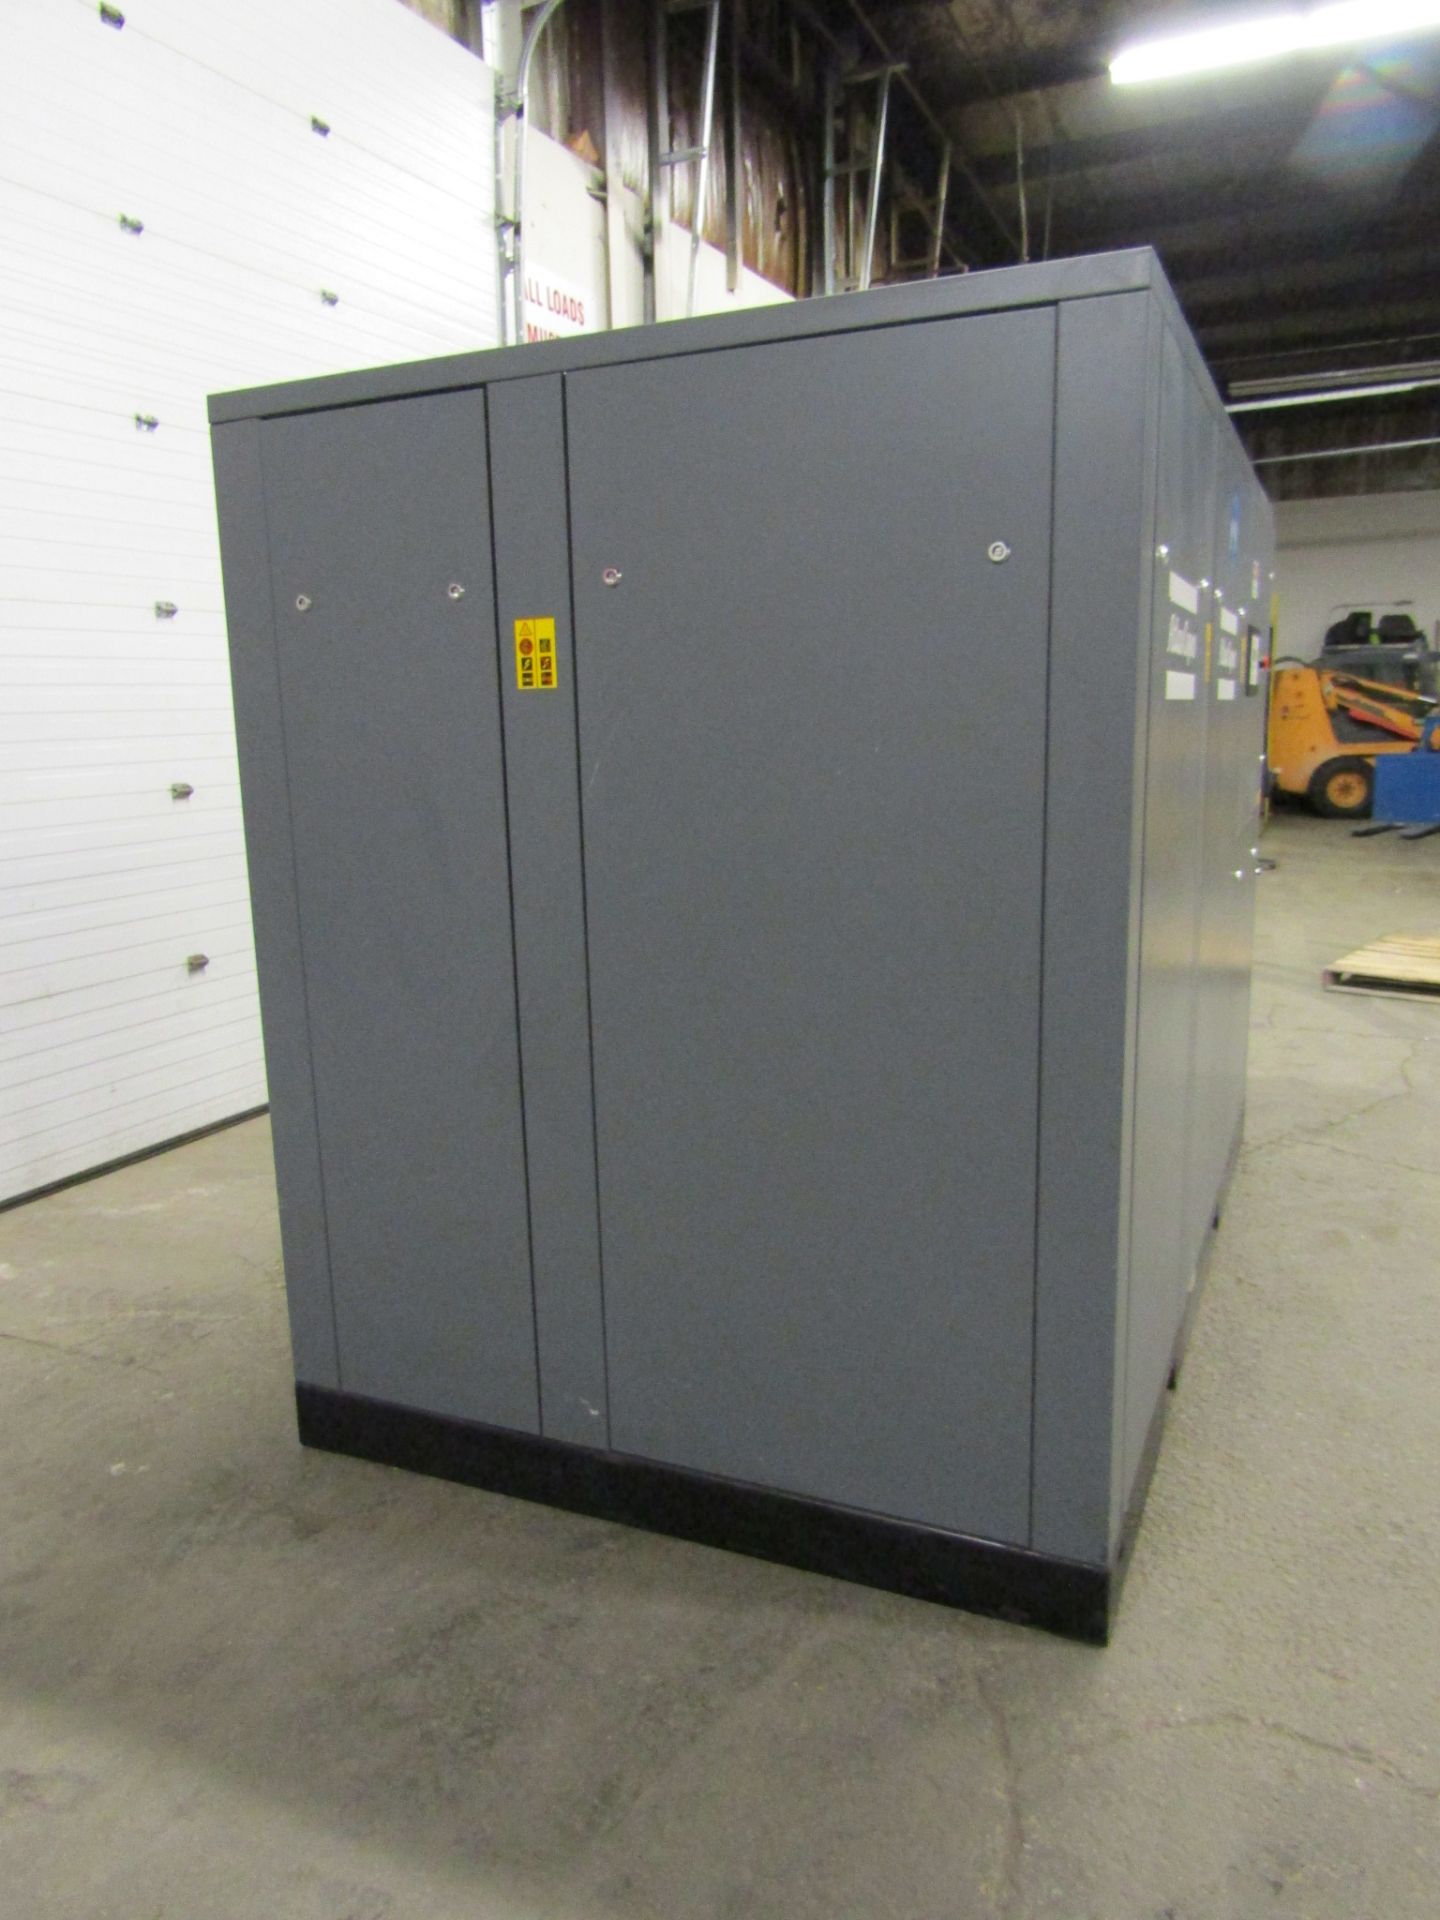 Atlas Copco GA110 161HP Rotary Screw Air Compressor with LOW HOURS under 5000 hours - 132 PSI 120 - Image 3 of 3